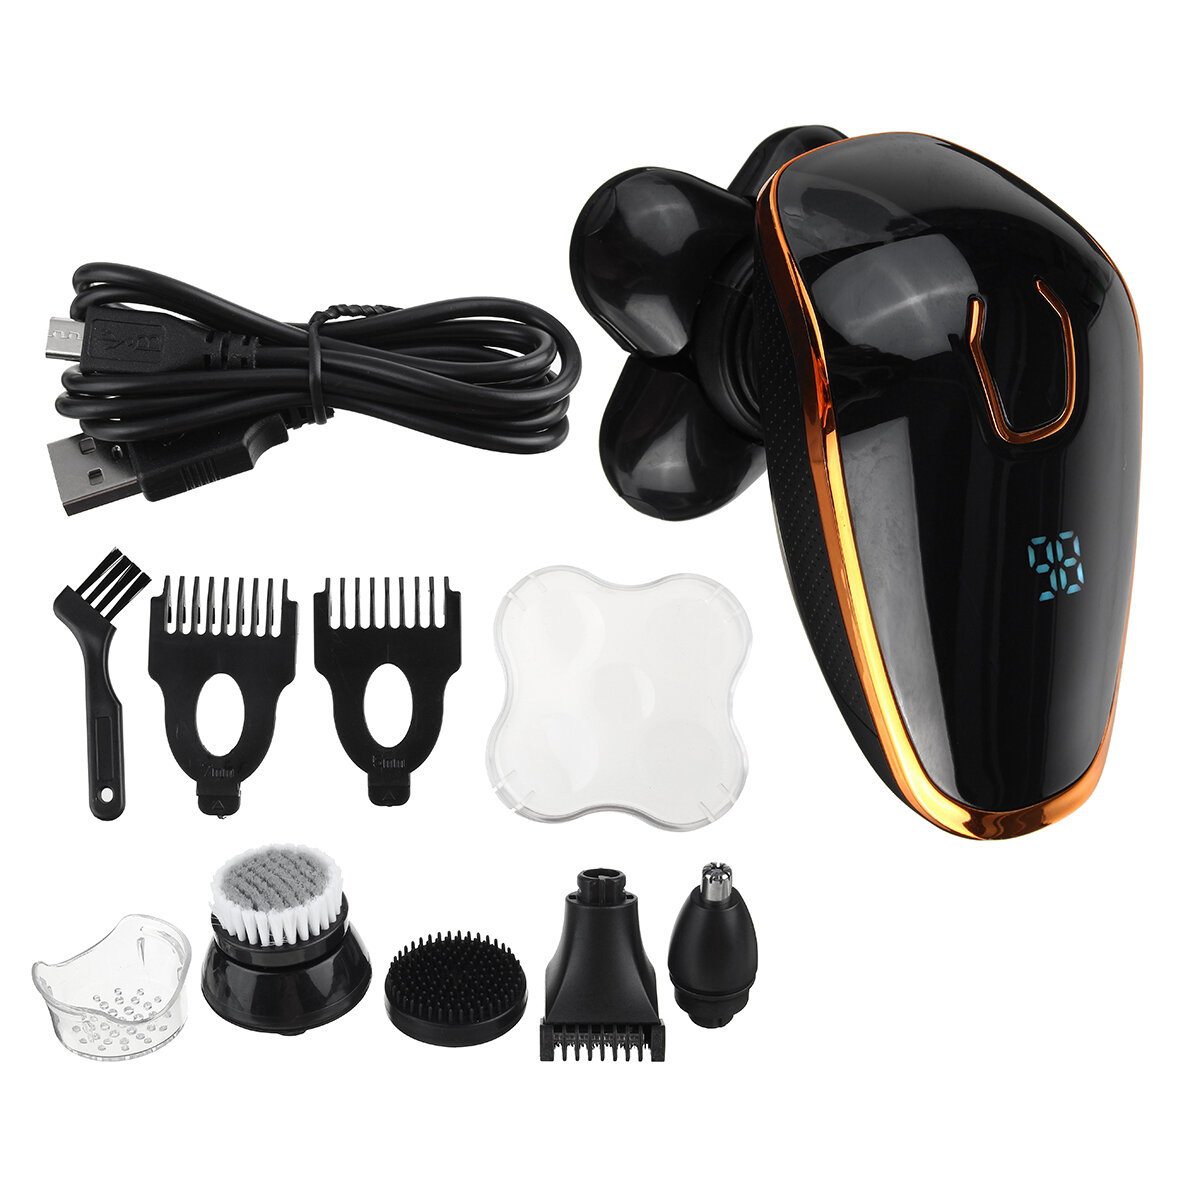 5 Heads Rotary Electric Shaver USB Rechargeable Waterproof Beard Razor Nose Hair Trimmer